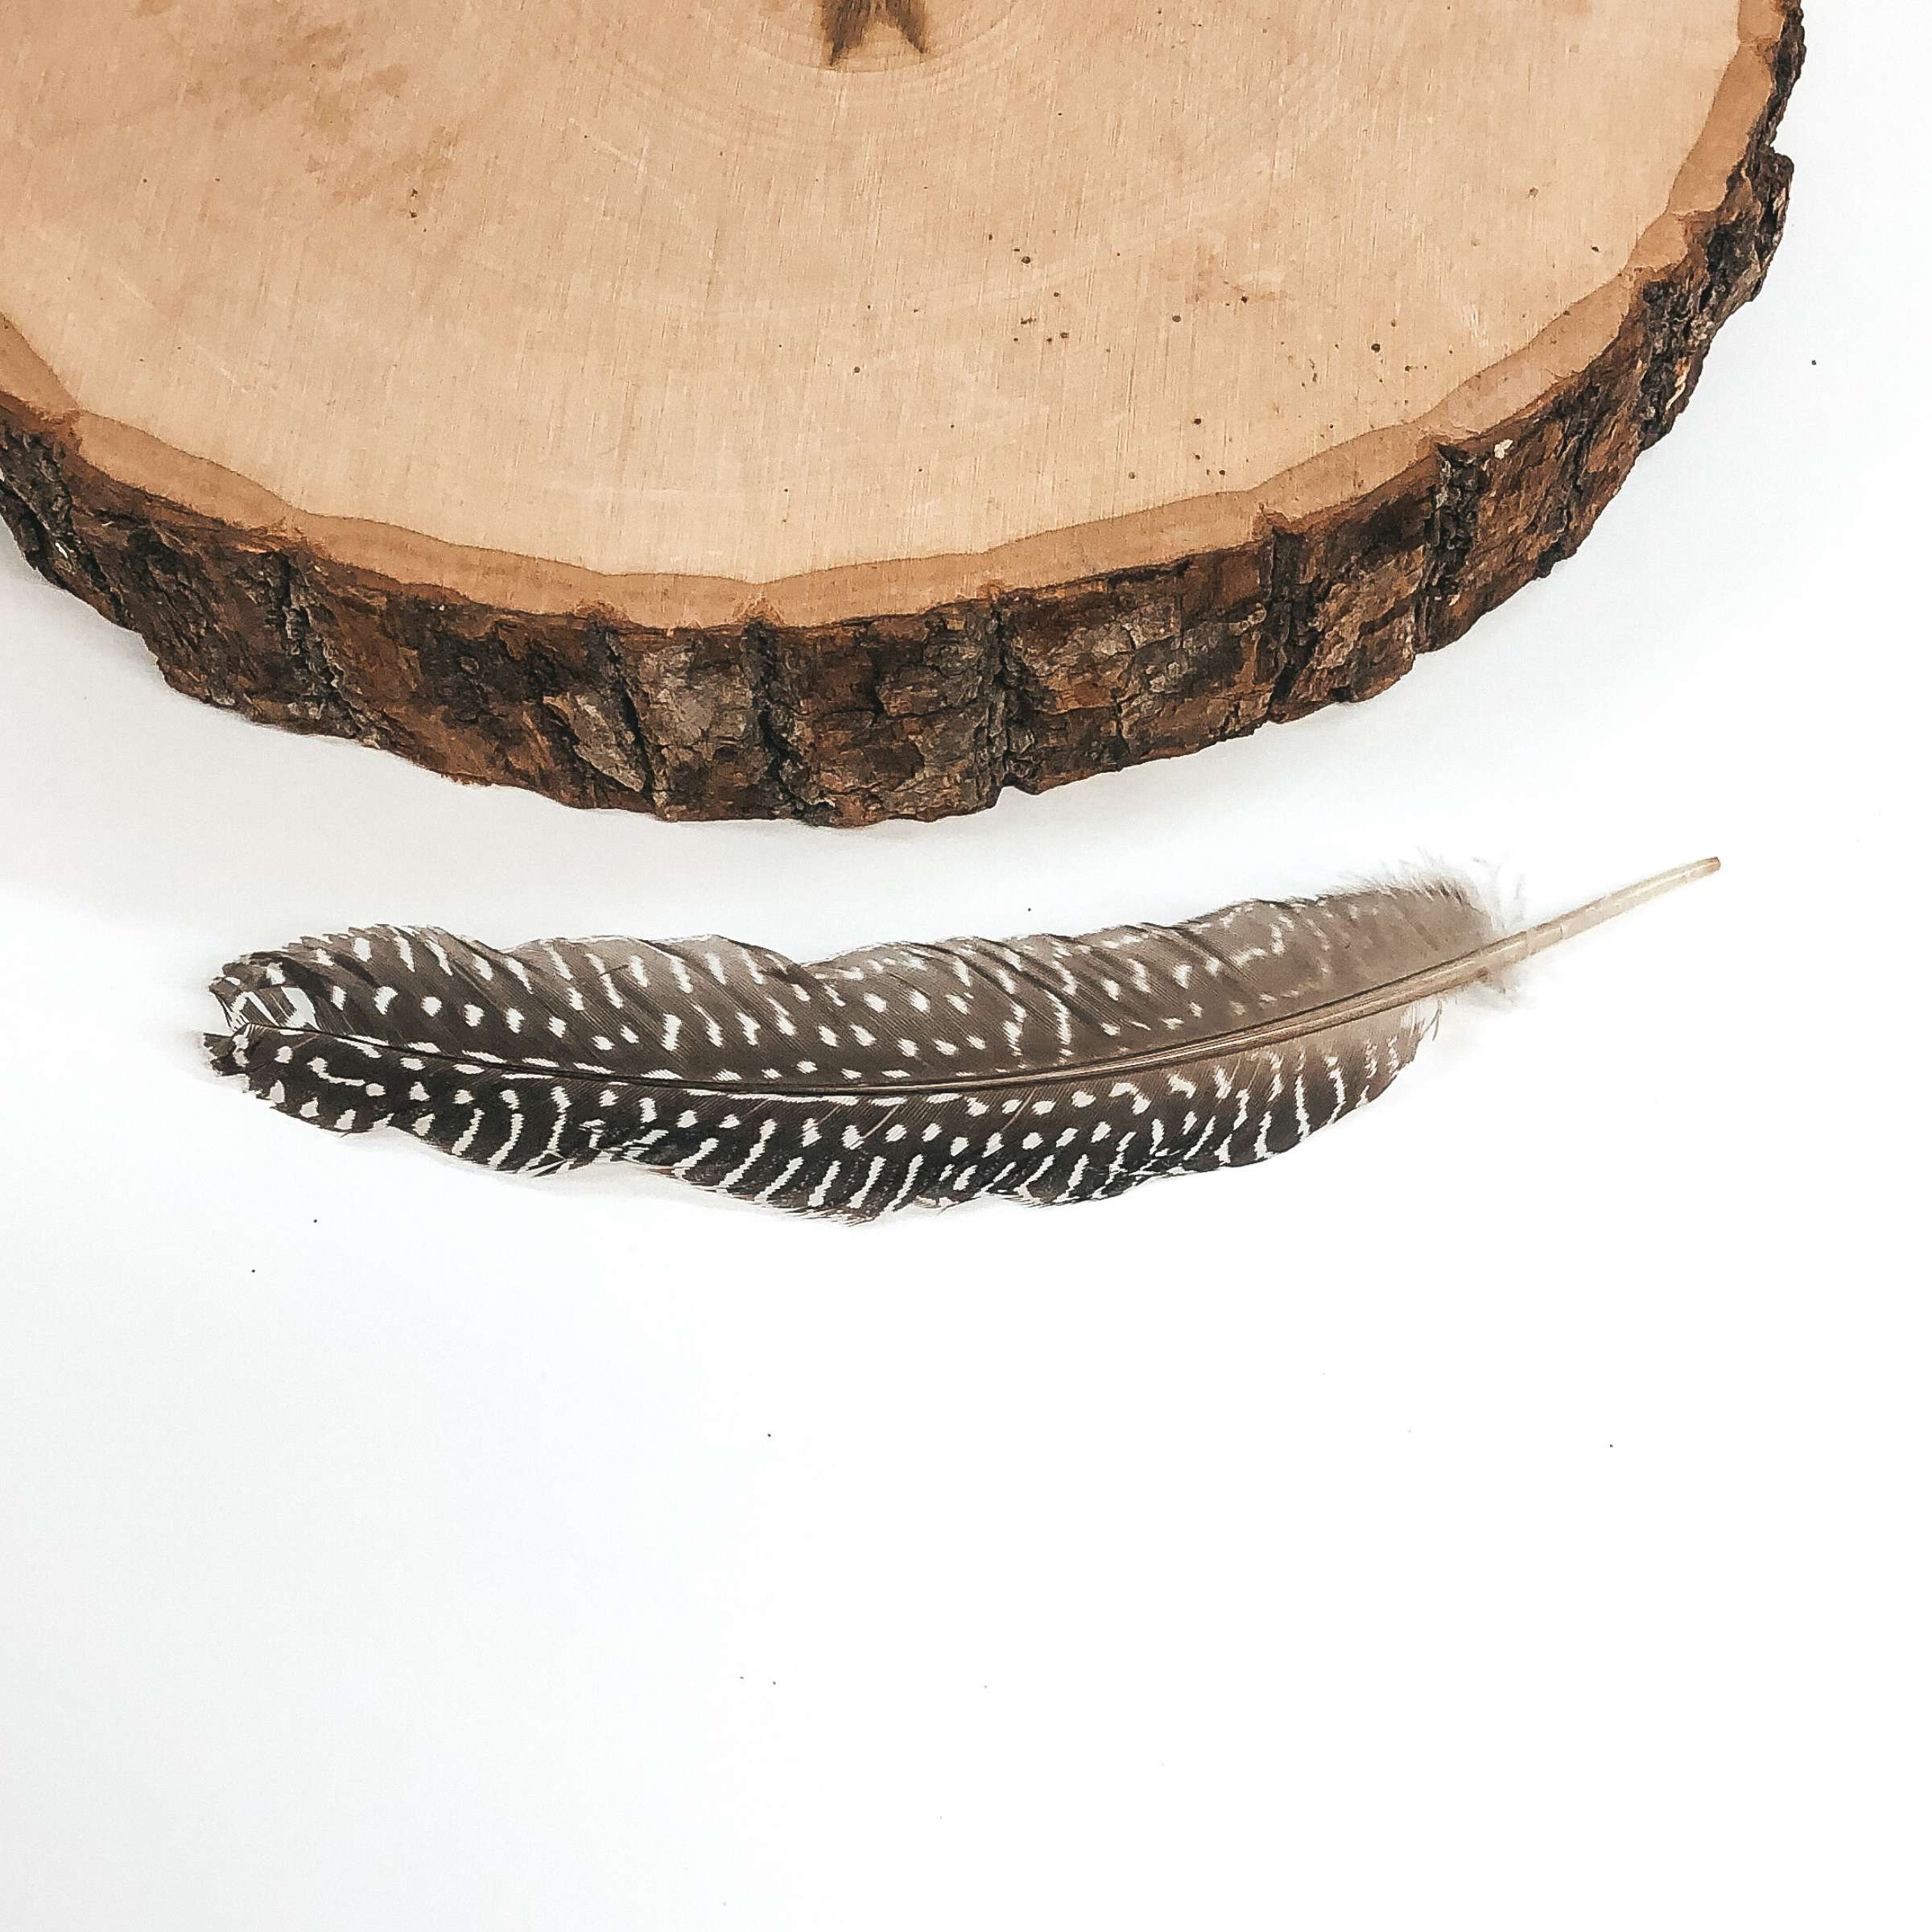 This is a brown feather with a small white dots and stripes. This feather is pictured on a white background with a piece of wood at the top of the picture.